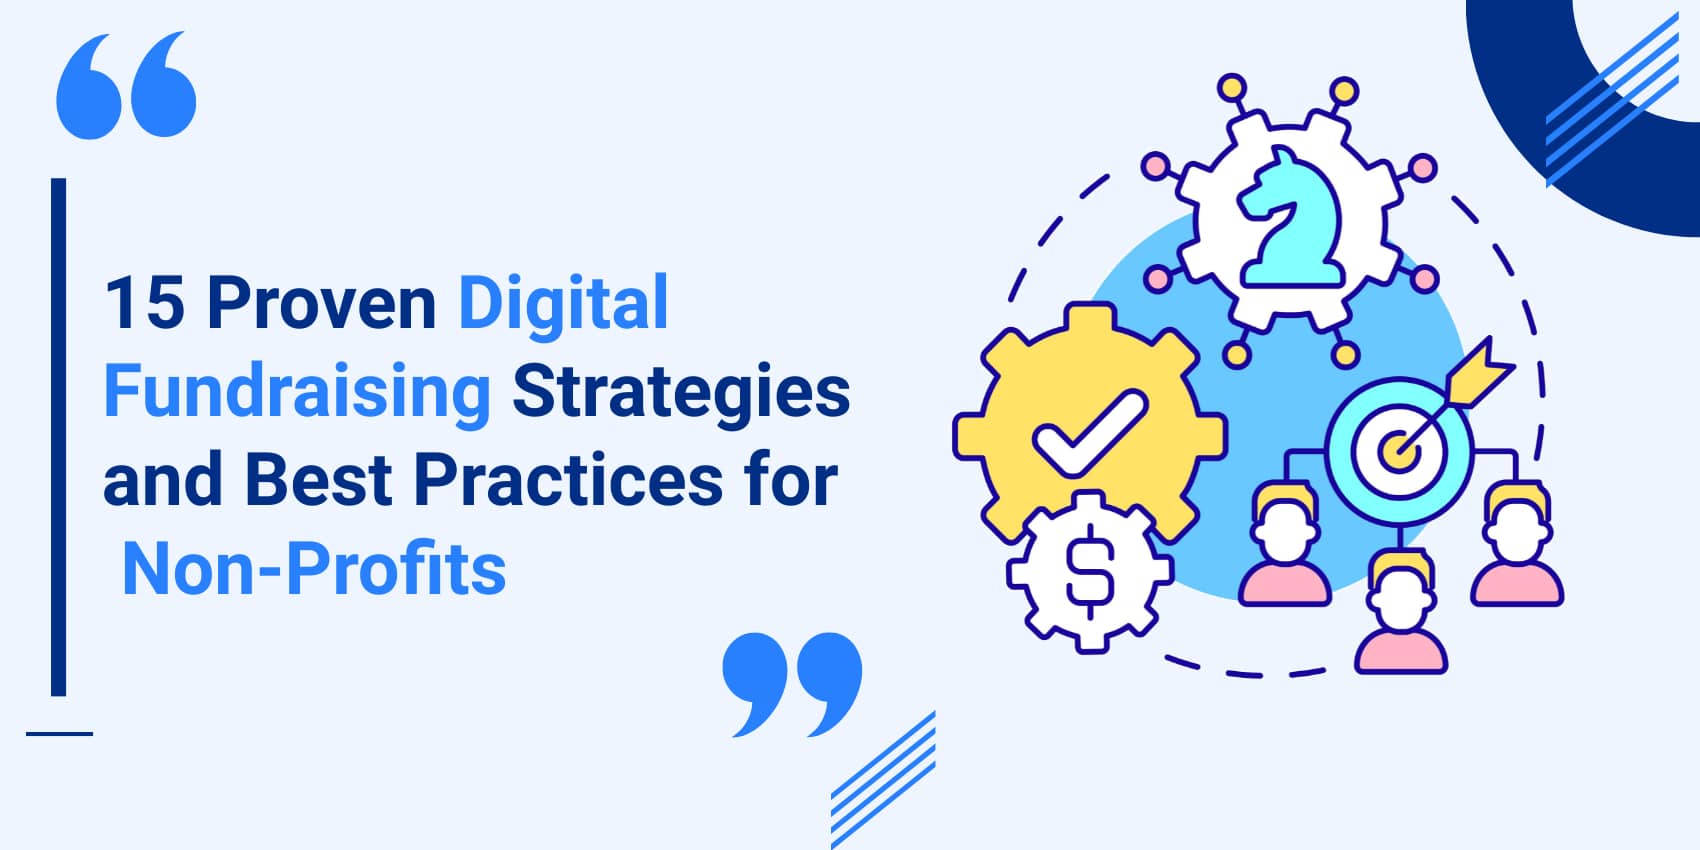 15 Proven Digital Fundraising Strategies and Best Practices for Non-Profits